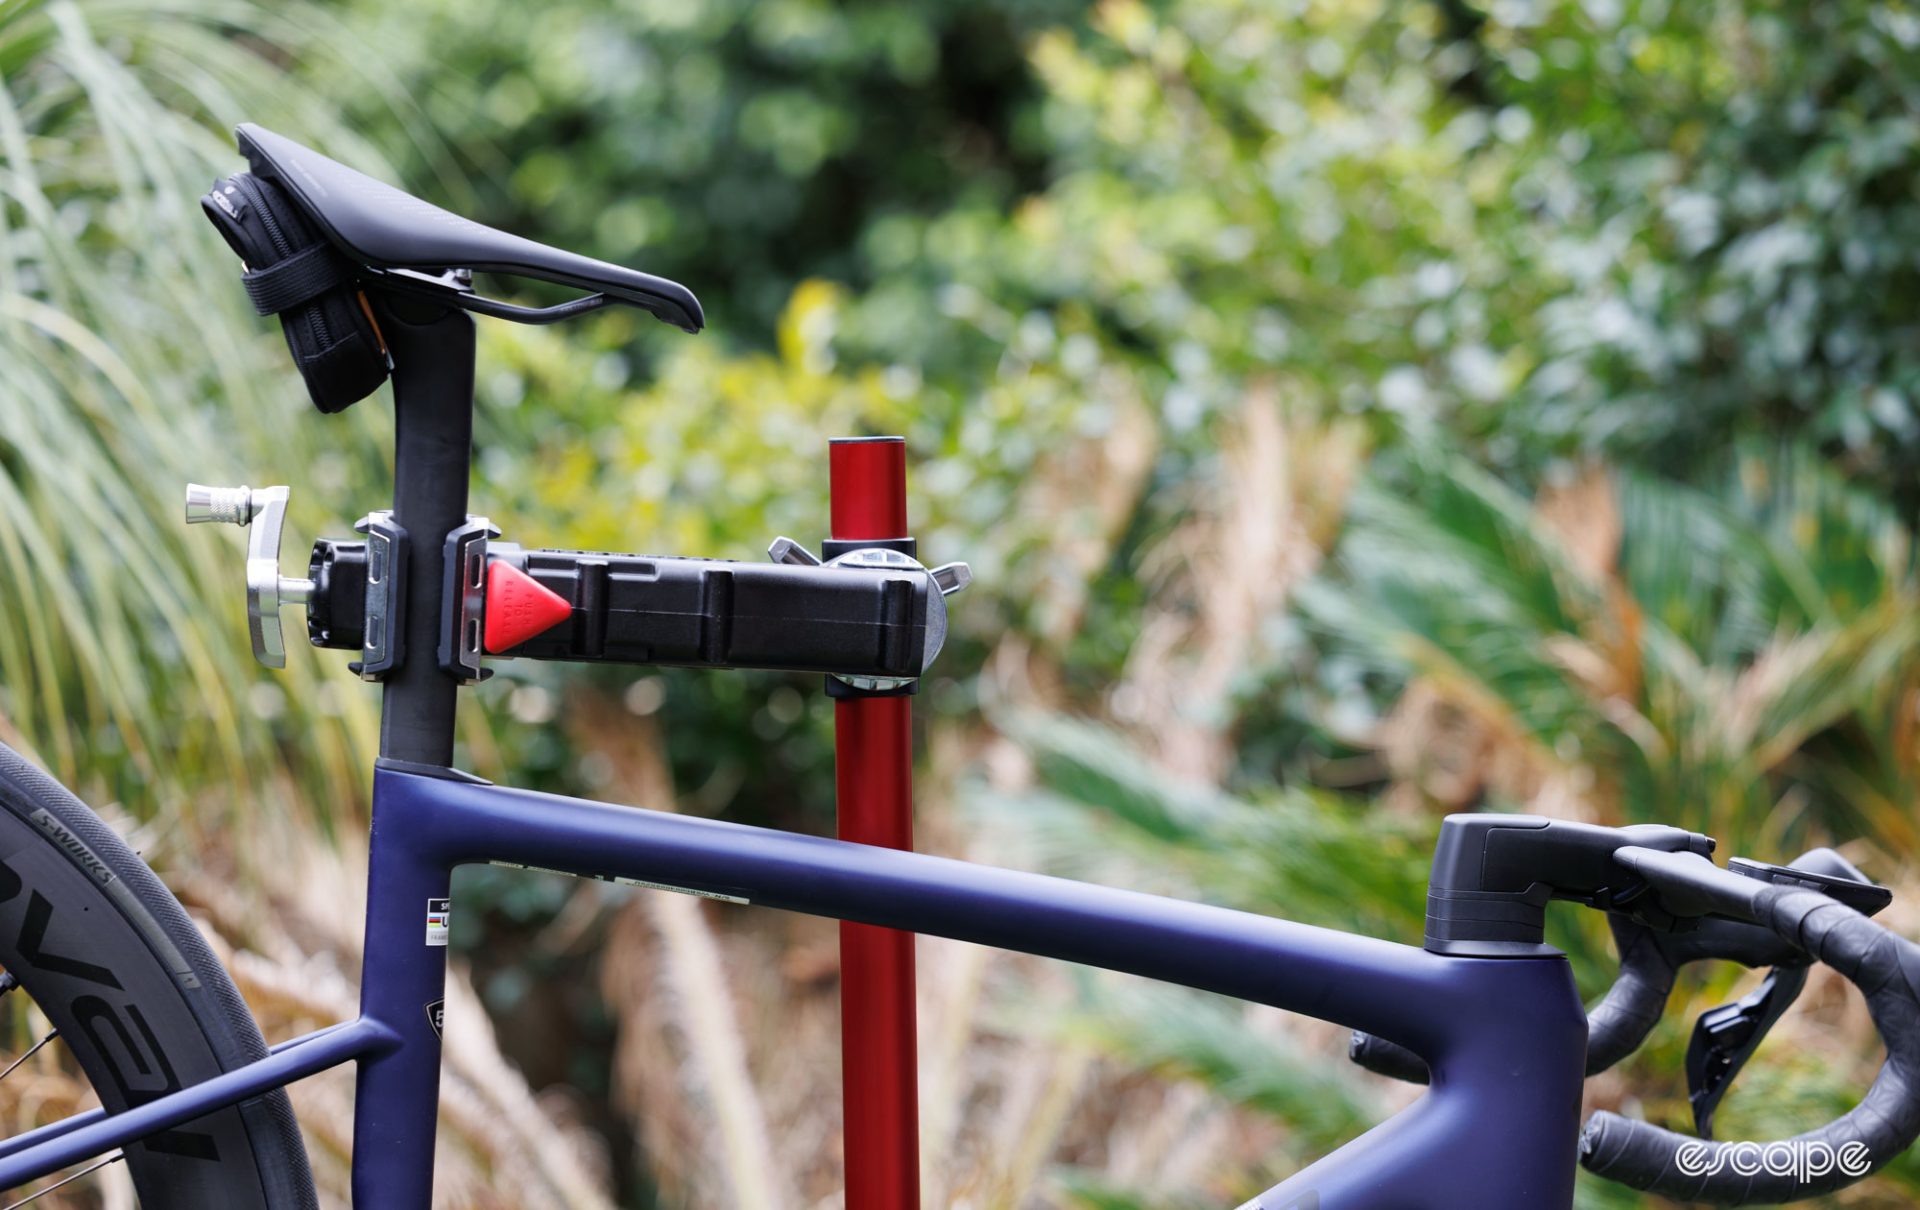 Feedback Sports stand being used in a backward setting that allows for clamping of aero seatposts. 